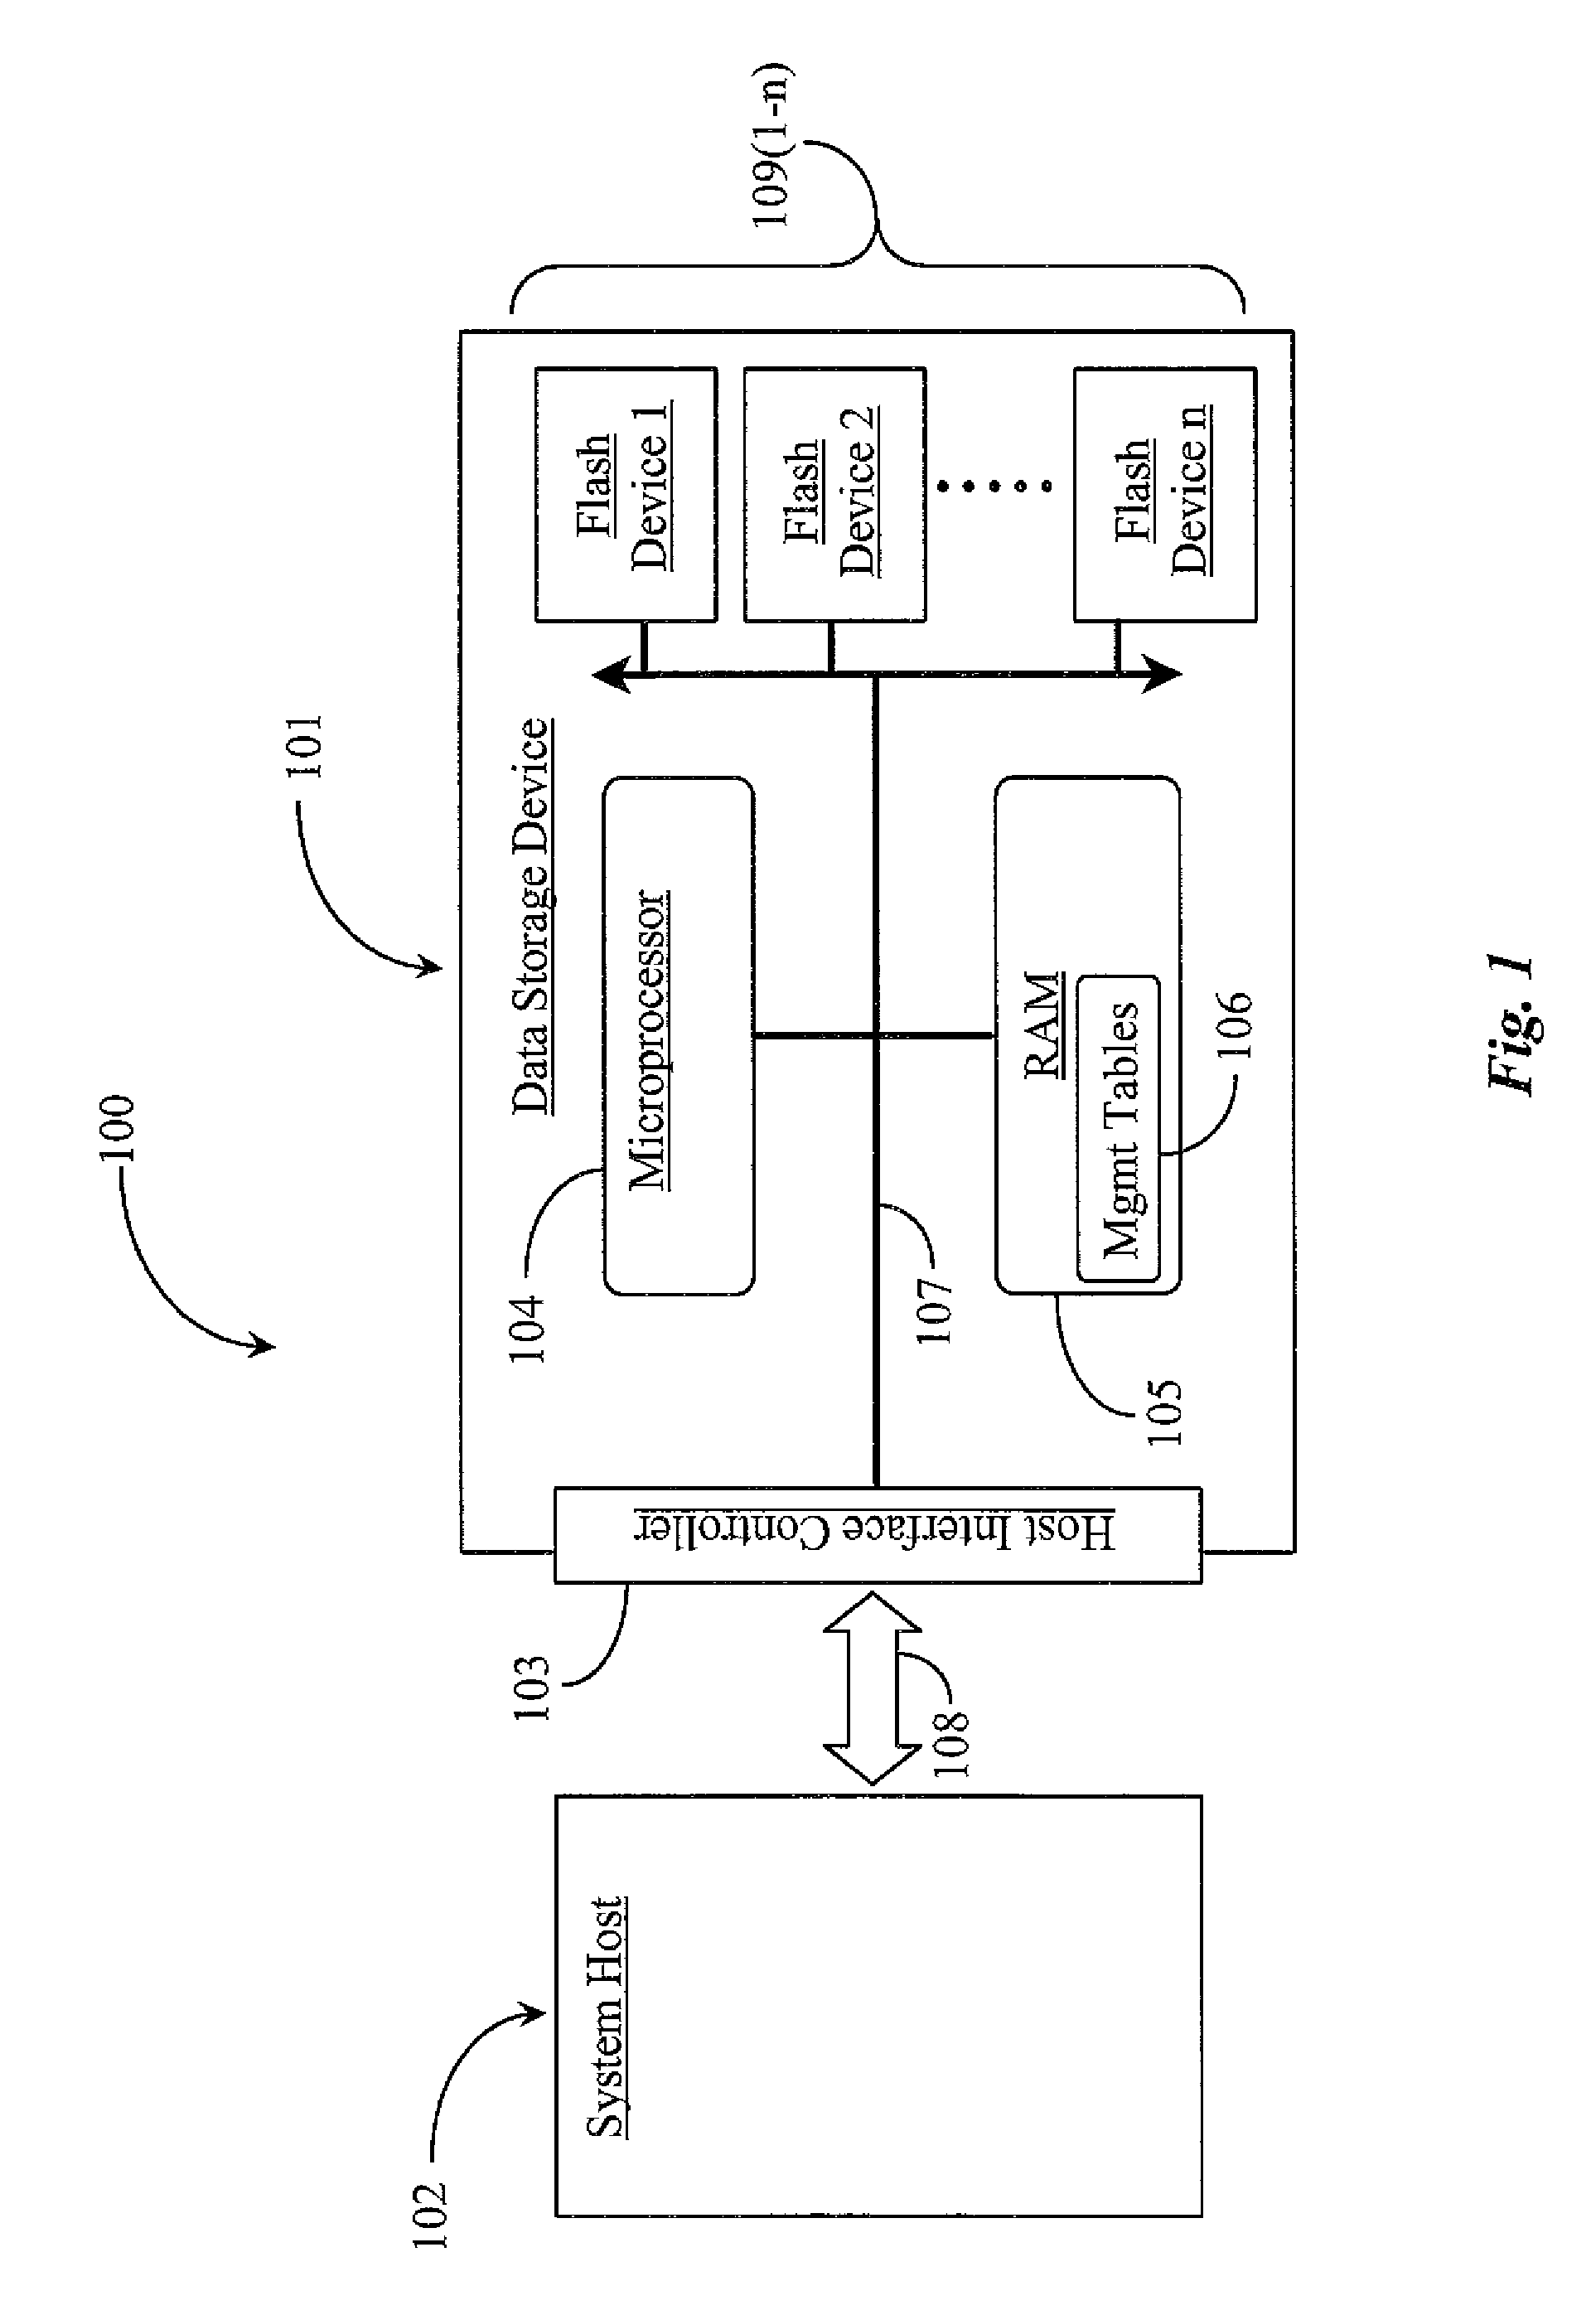 System for reading and writing on flash memory device having plural microprocessors